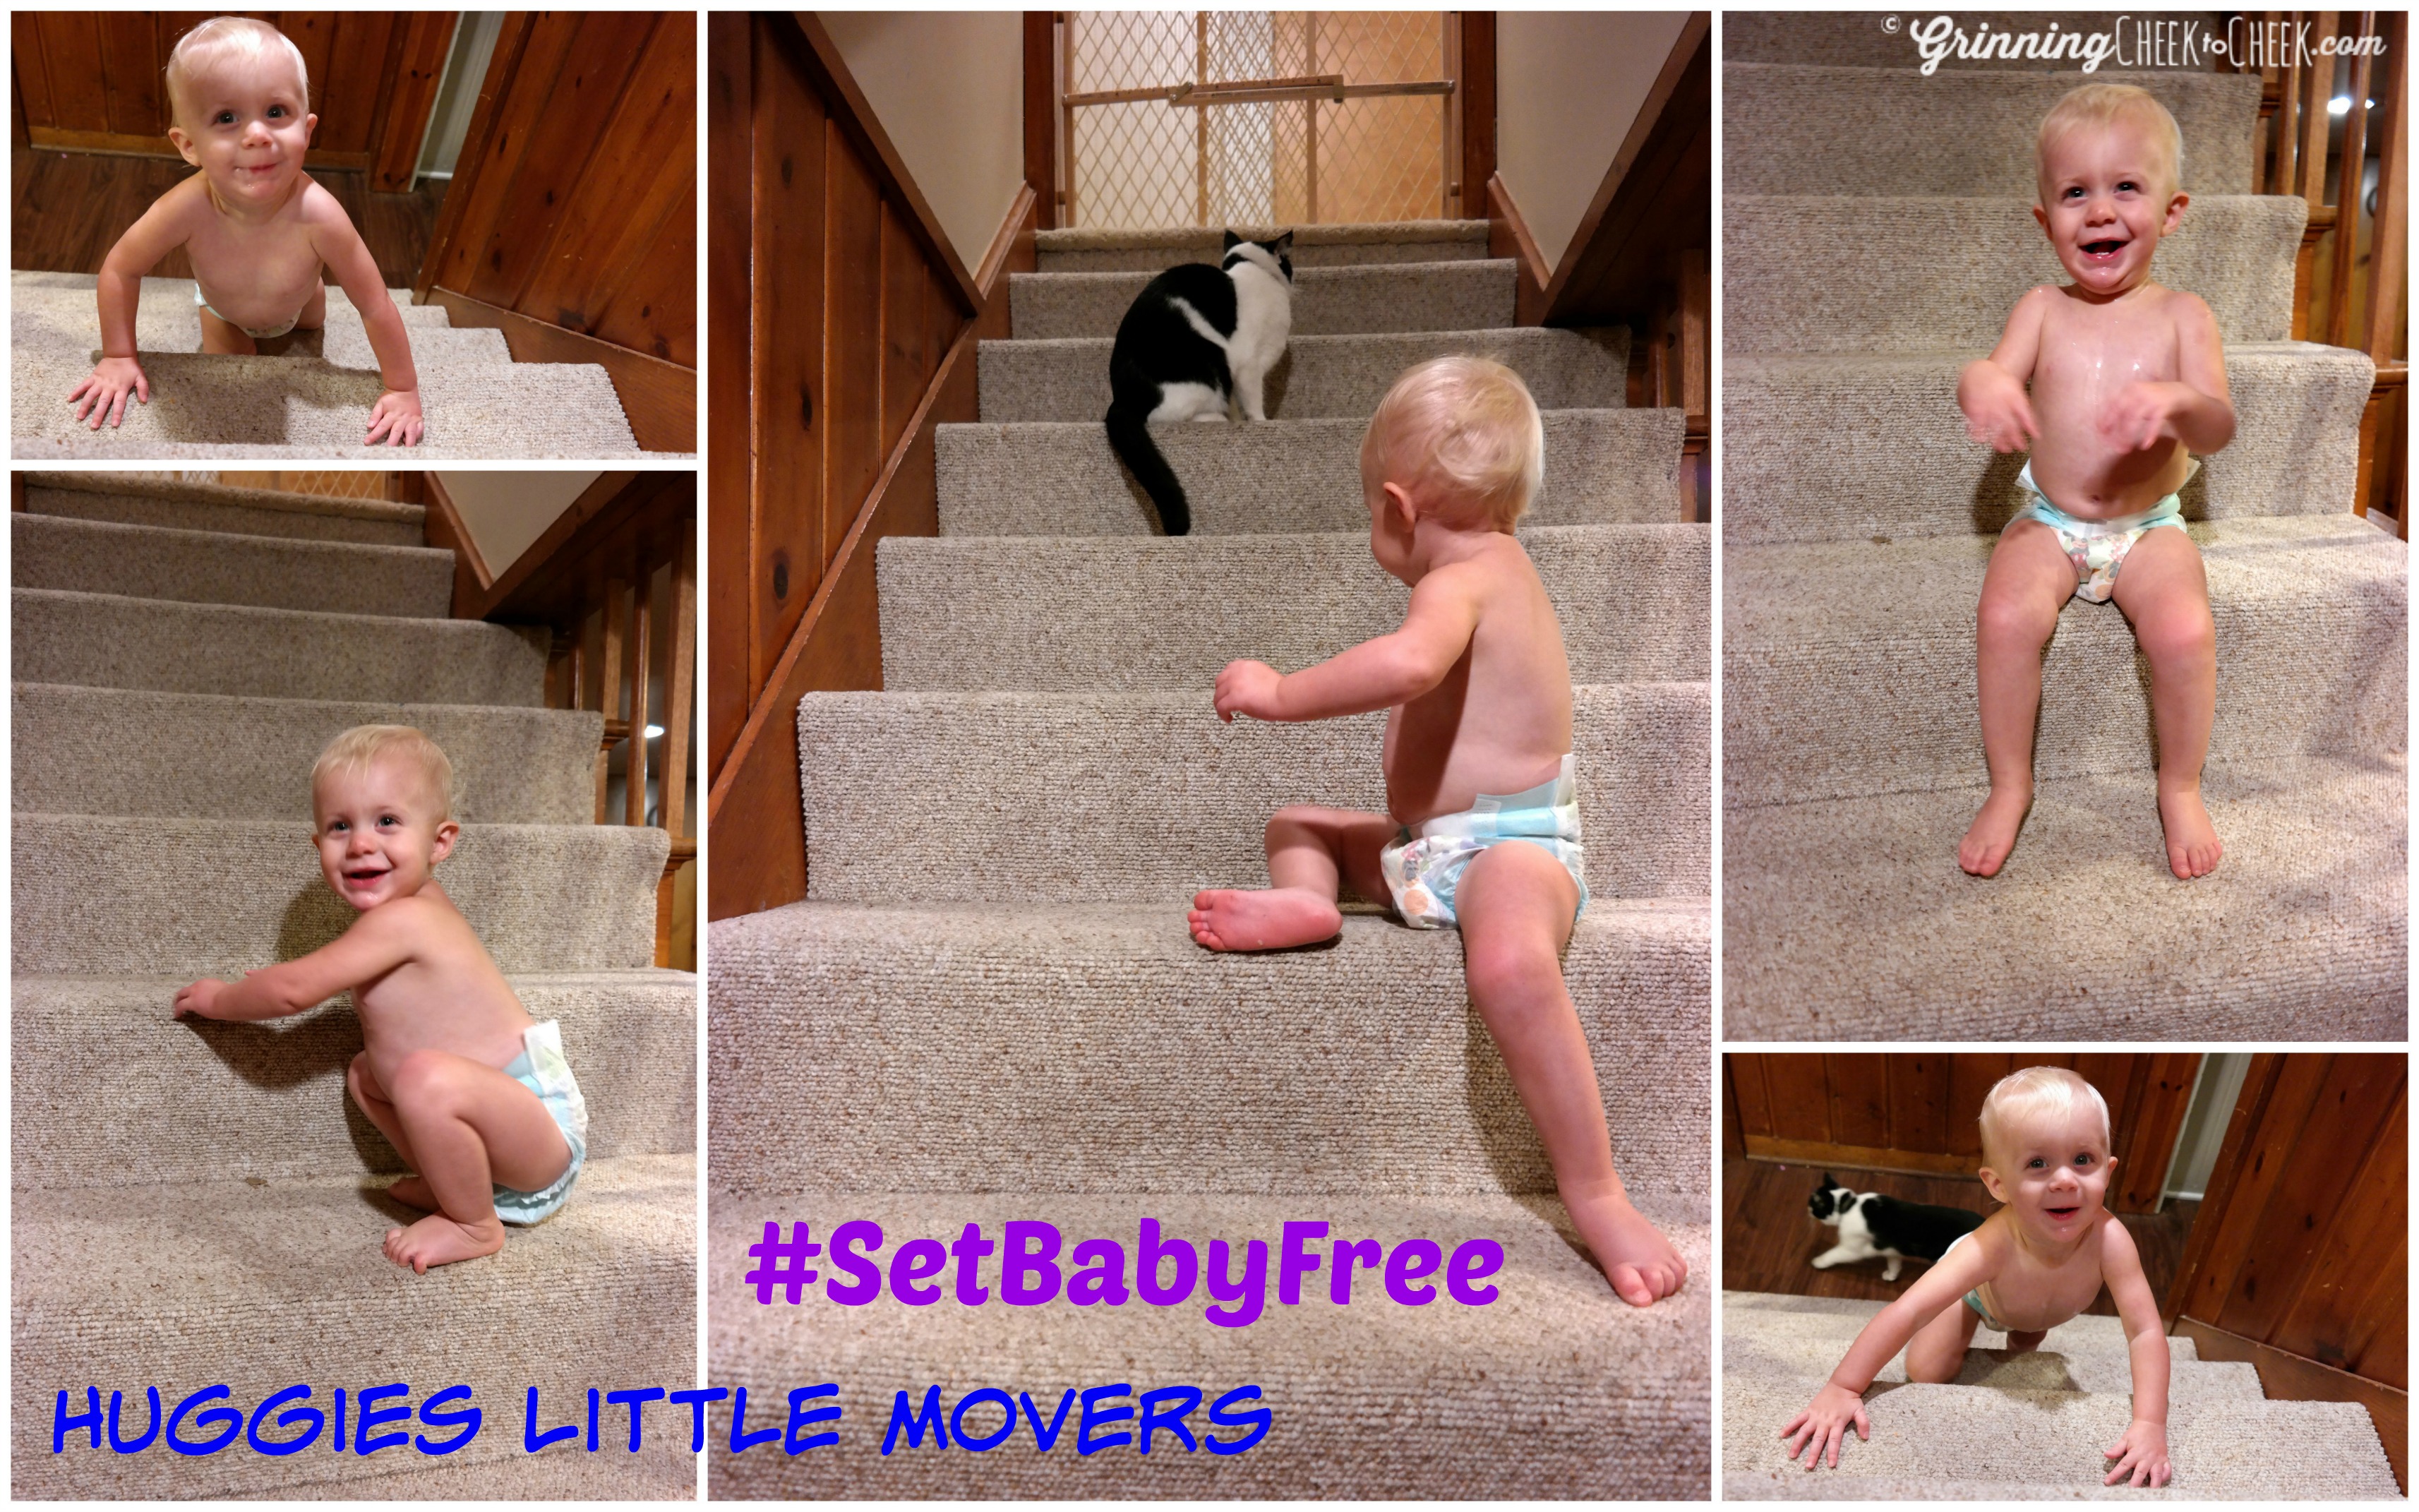 Experience the Joy of Movement with Huggies Little Movers #SetBabyFree